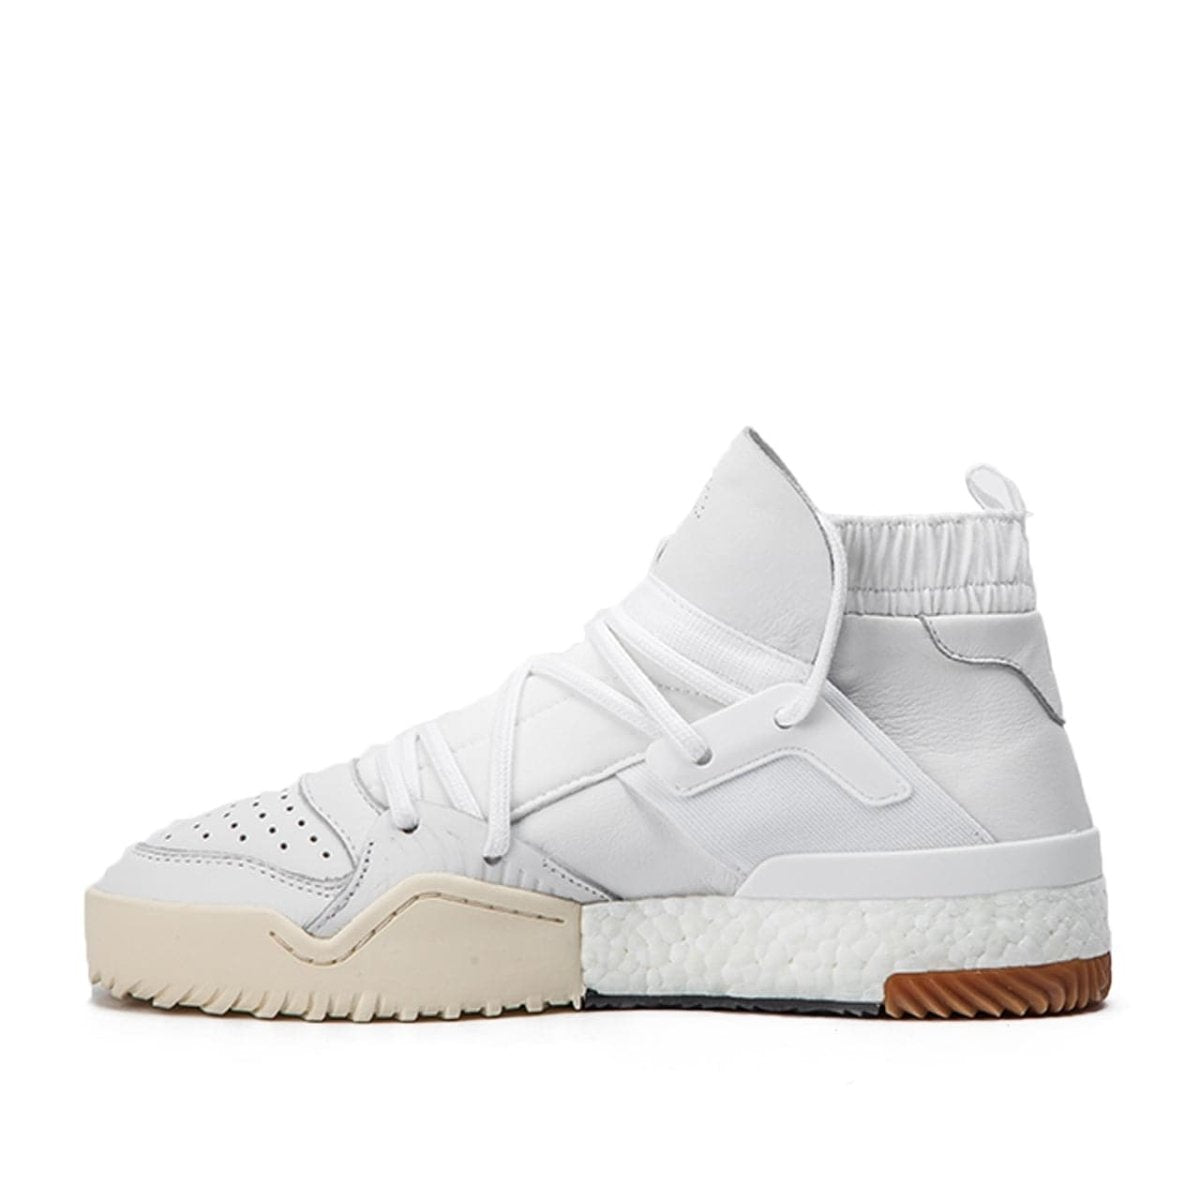 adidas by Alexander Wang AW Bball Mid Boost (Weiß)  - Allike Store